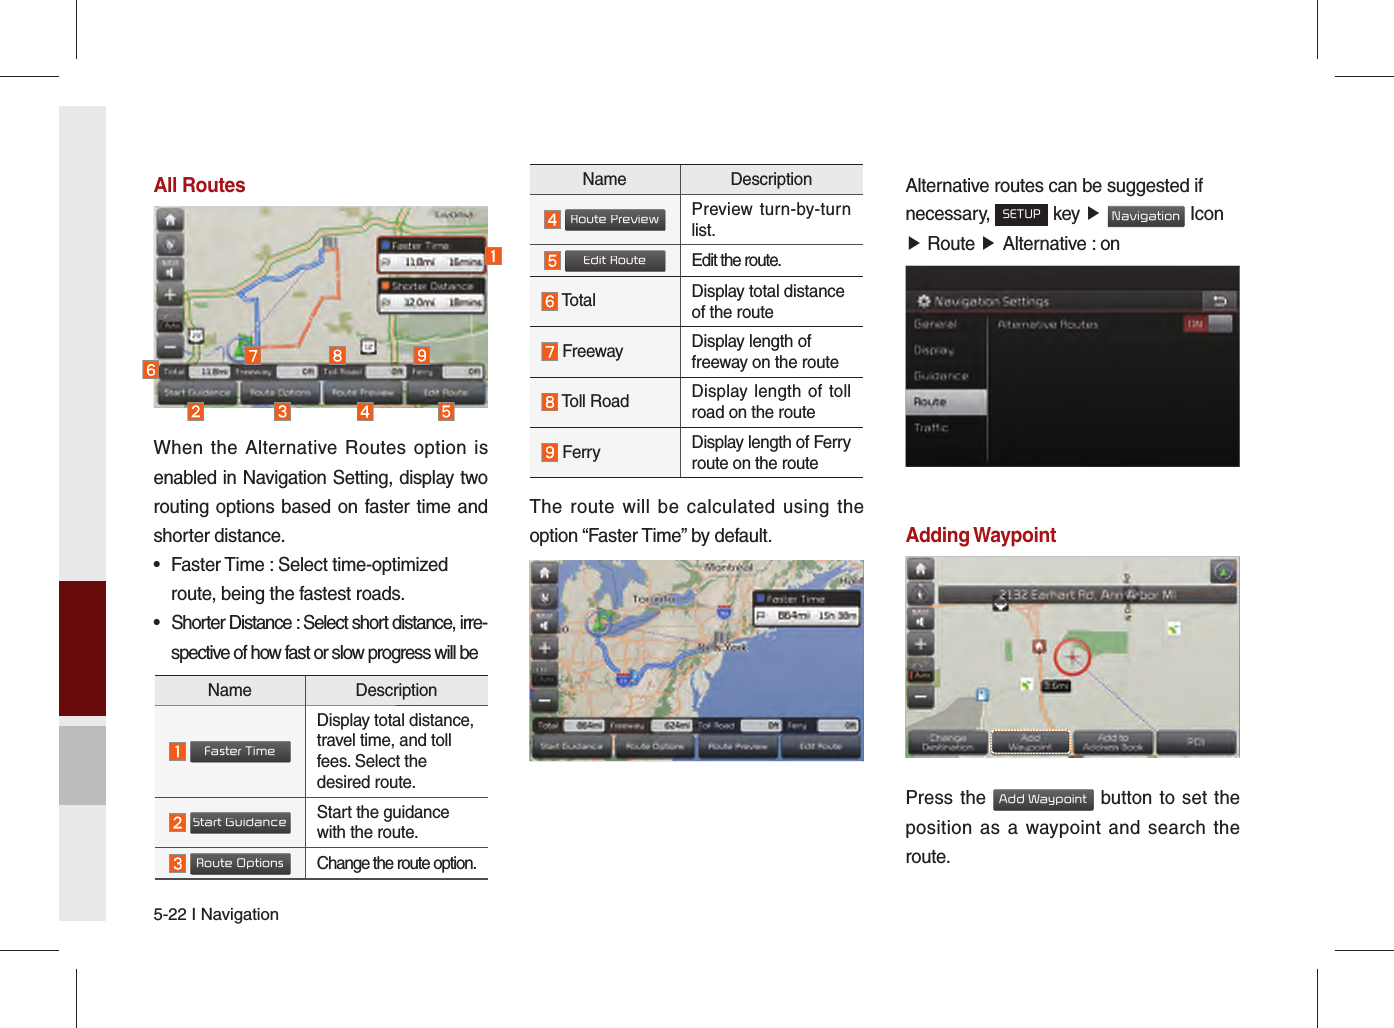 5-22 I NavigationAll Routes                                      When the Alternative Routes option is enabled in Navigation Setting, display two routing options based on faster time and shorter distance.•  Faster Time : Select time-optimized route, being the fastest roads.•  Shorter Distance : Select short distance, irre-spective of how fast or slow progress will beThe route will be calculated using the option “Faster Time” by default.Alternative routes can be suggested if necessary, SETUP key ▶ Navigation Icon ▶ Route ▶ Alternative : onAdding WaypointPress the Add Waypoint button to set the position as a waypoint and search the route.Name Description Route PreviewPreview turn-by-turn list. Edit RouteEdit the route. Total Display total distance of the route Freeway  Display length of freeway on the route Toll Road  Display length of toll road on the route Ferry Display length of Ferry route on the routeName Description Faster TimeDisplay total distance, travel time, and toll fees. Select the desired route. Start GuidanceStart the guidance with the route. Route OptionsChange the route option.